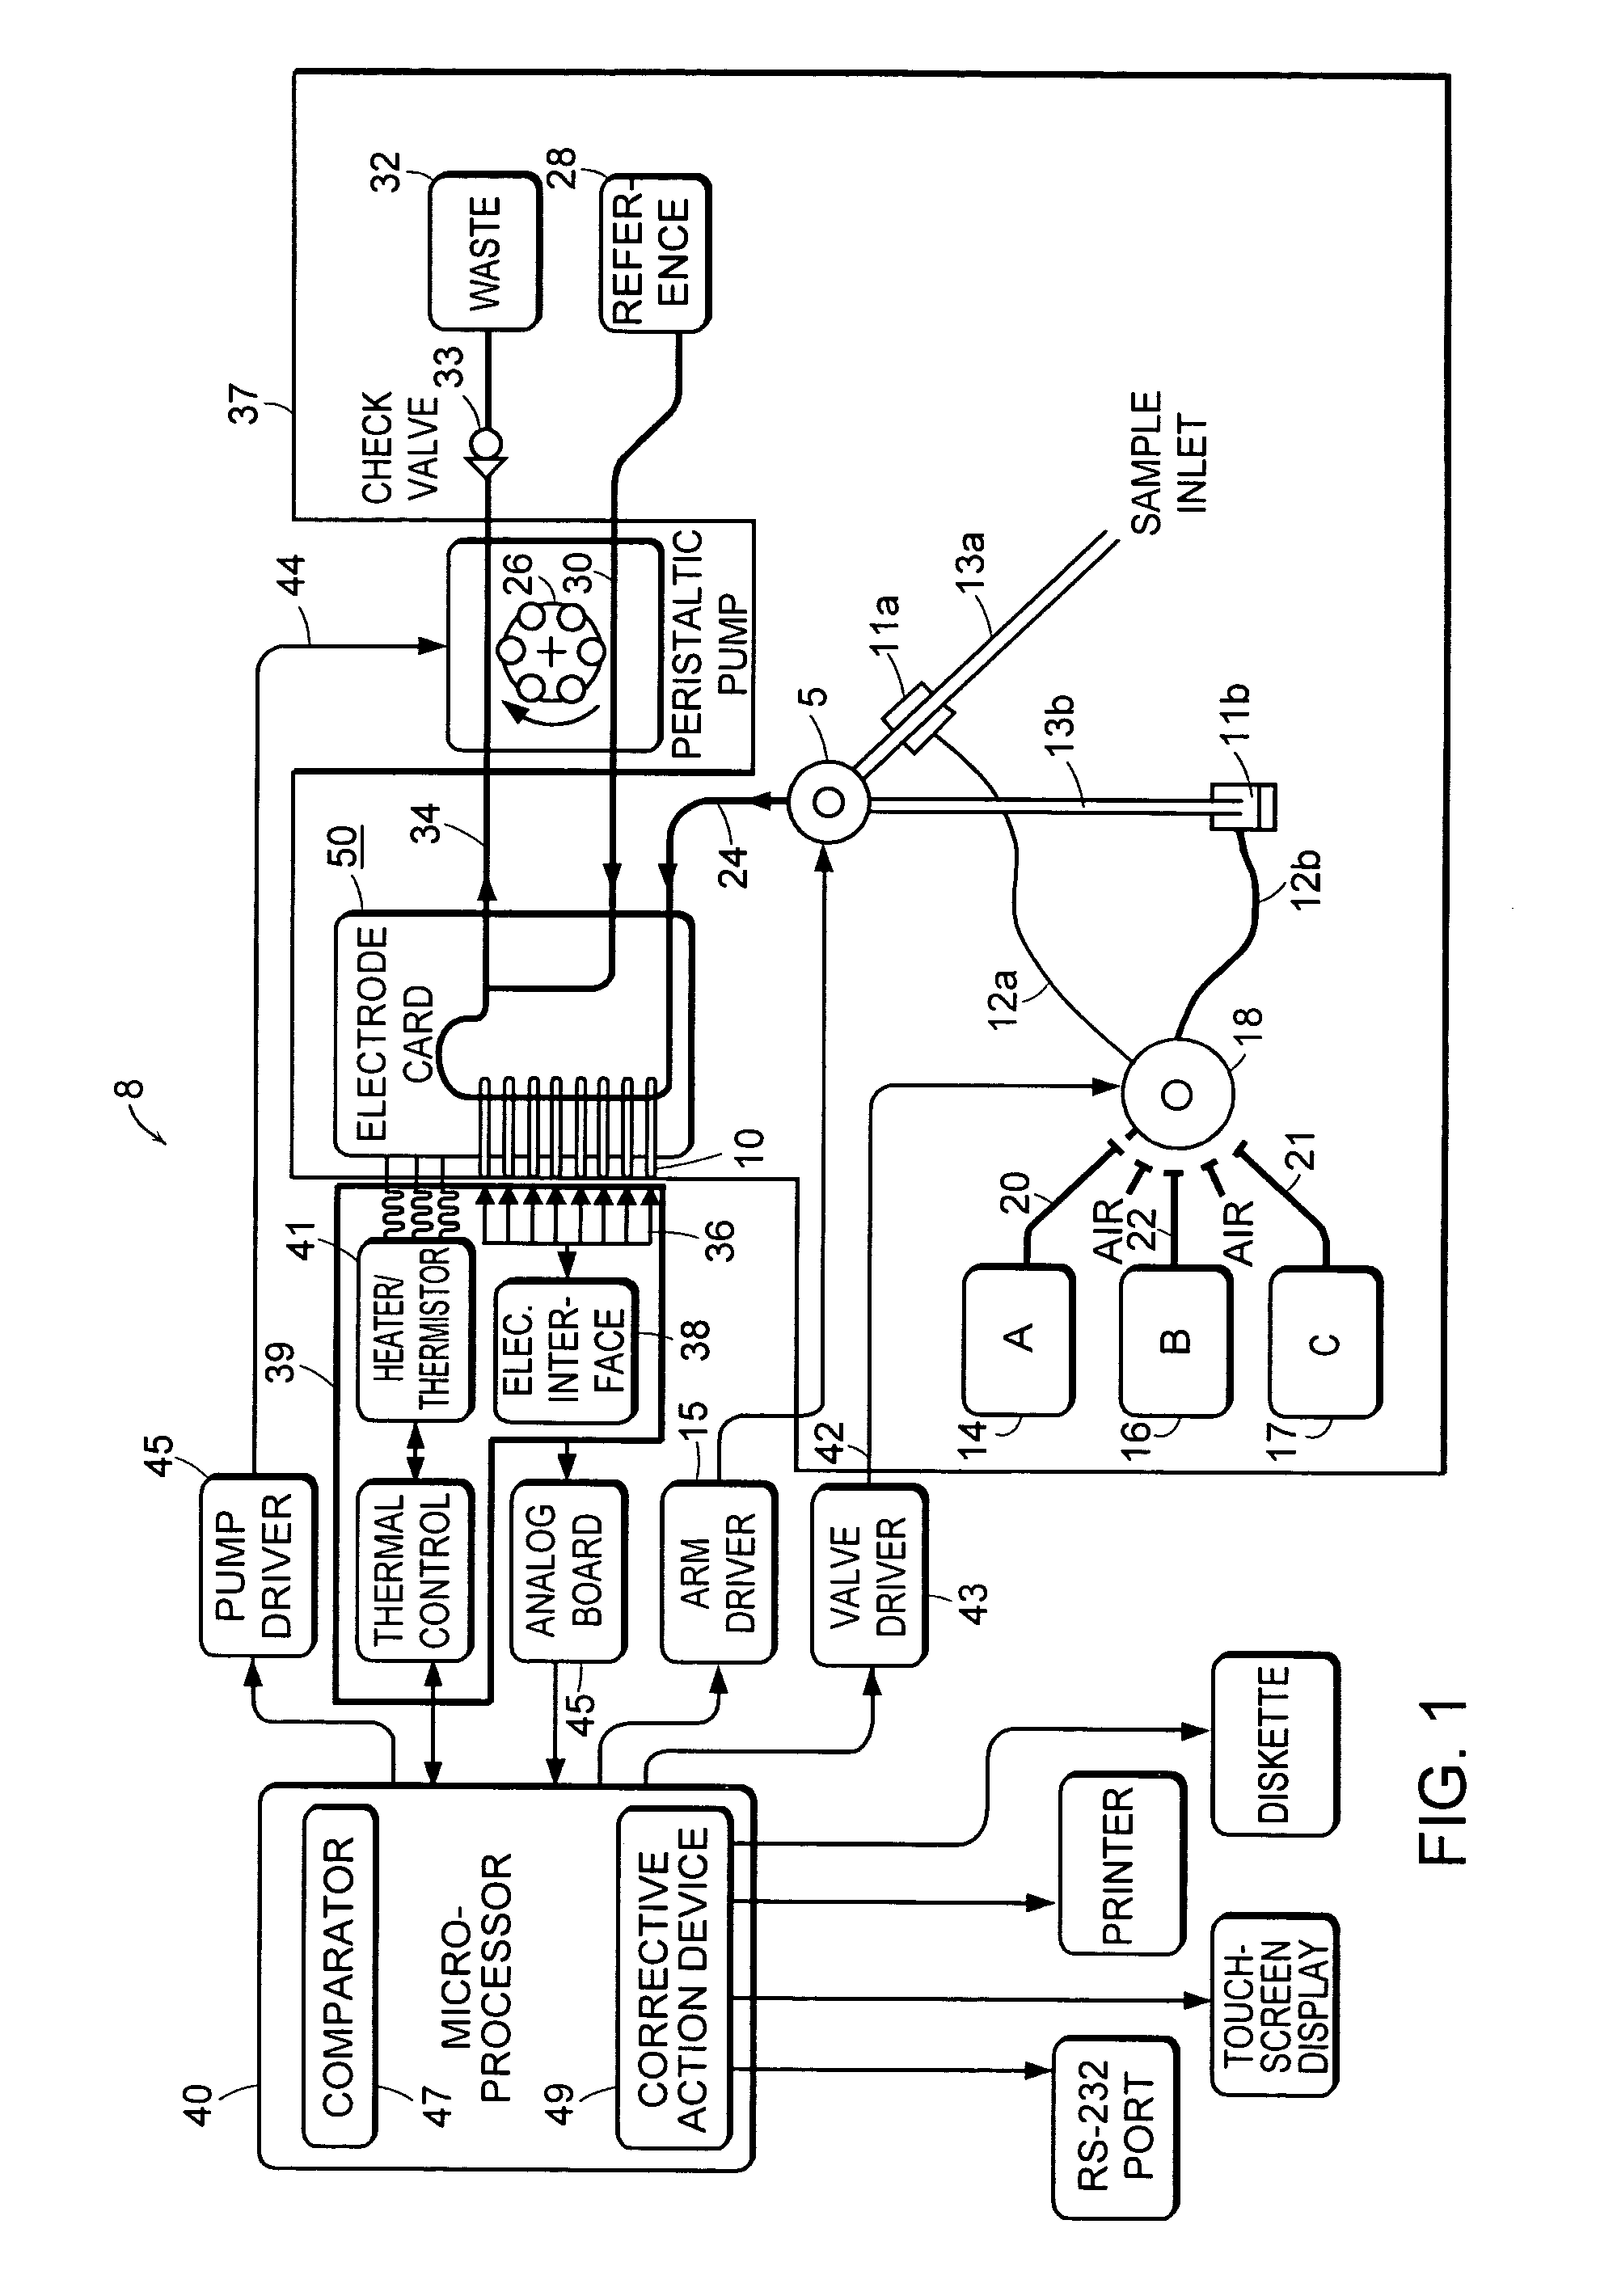 Automated system for continuously and automatically calibrating electrochemical sensors